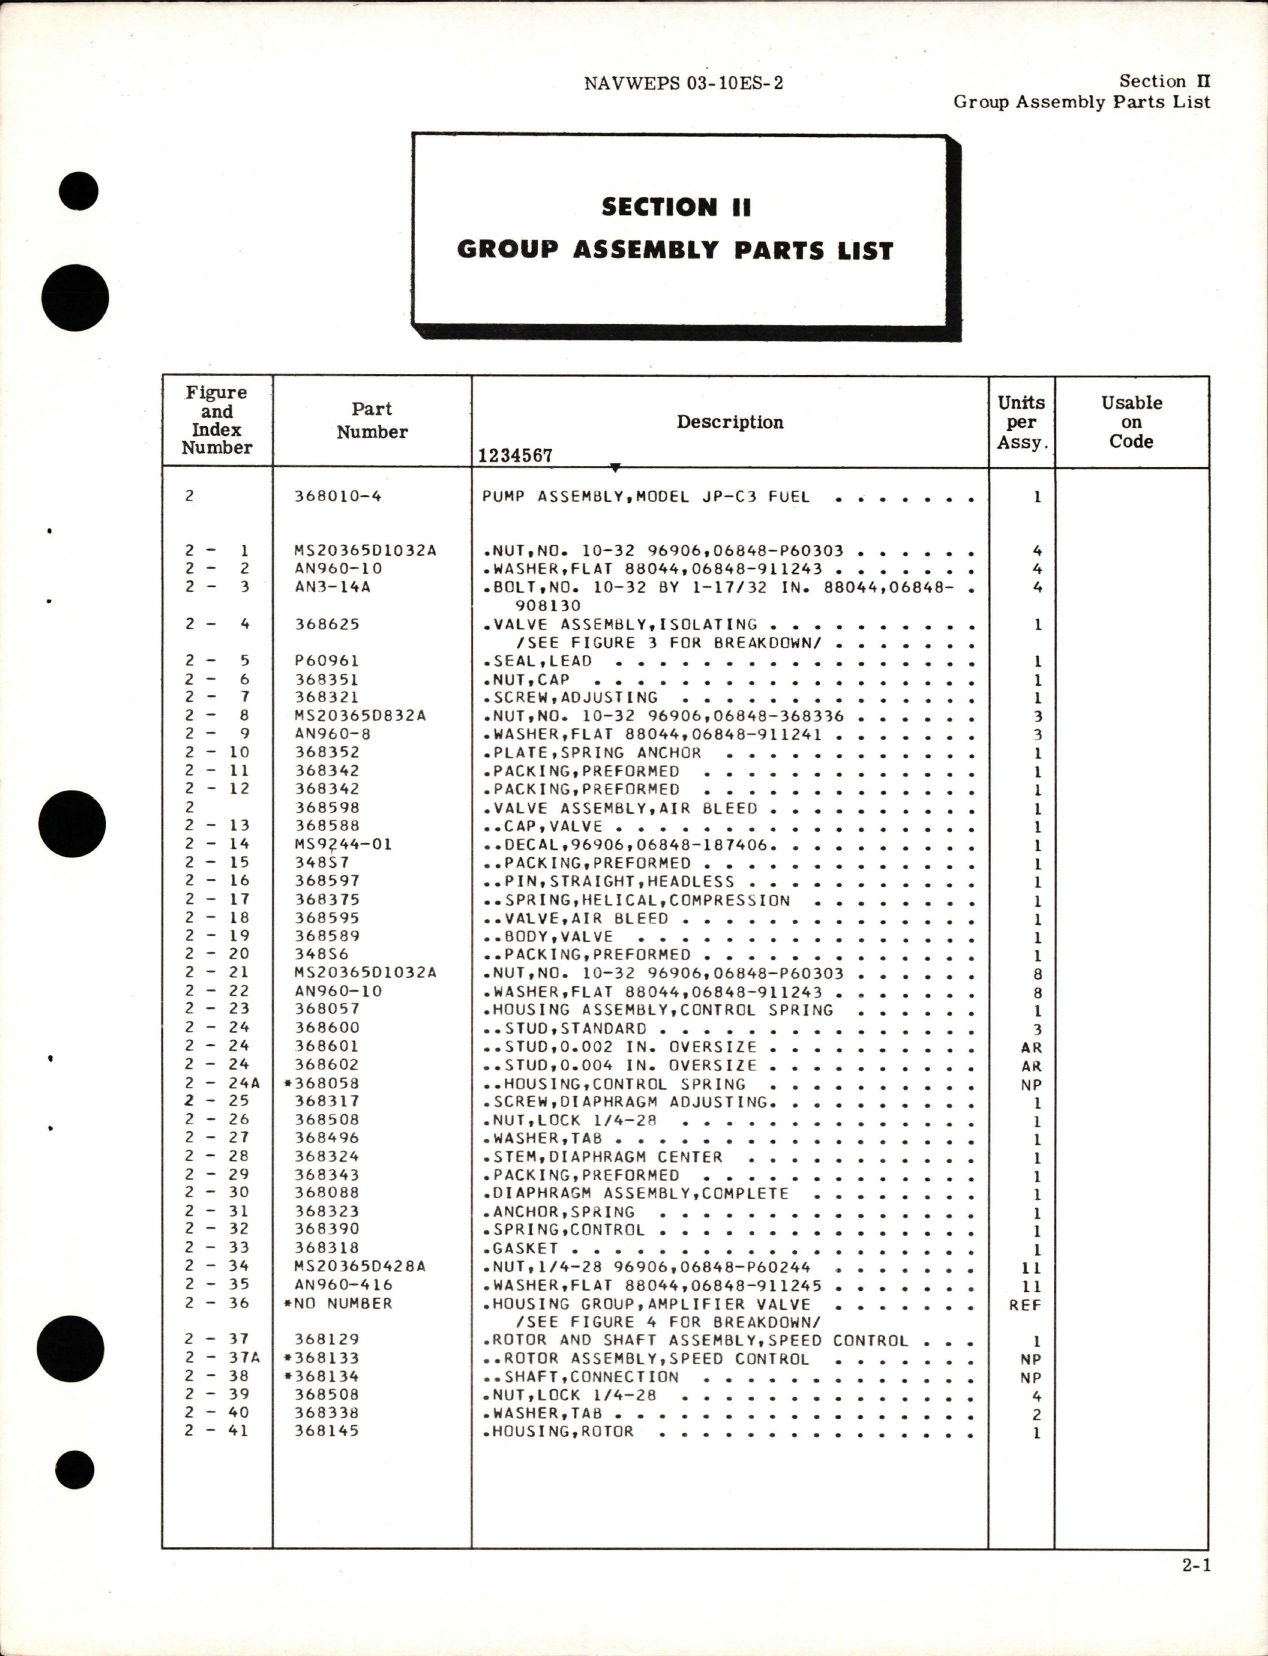 Sample page 7 from AirCorps Library document: Illustrated Parts Breakdown for Fuel Pump - Model JP-C3 - Parts List 368010-4